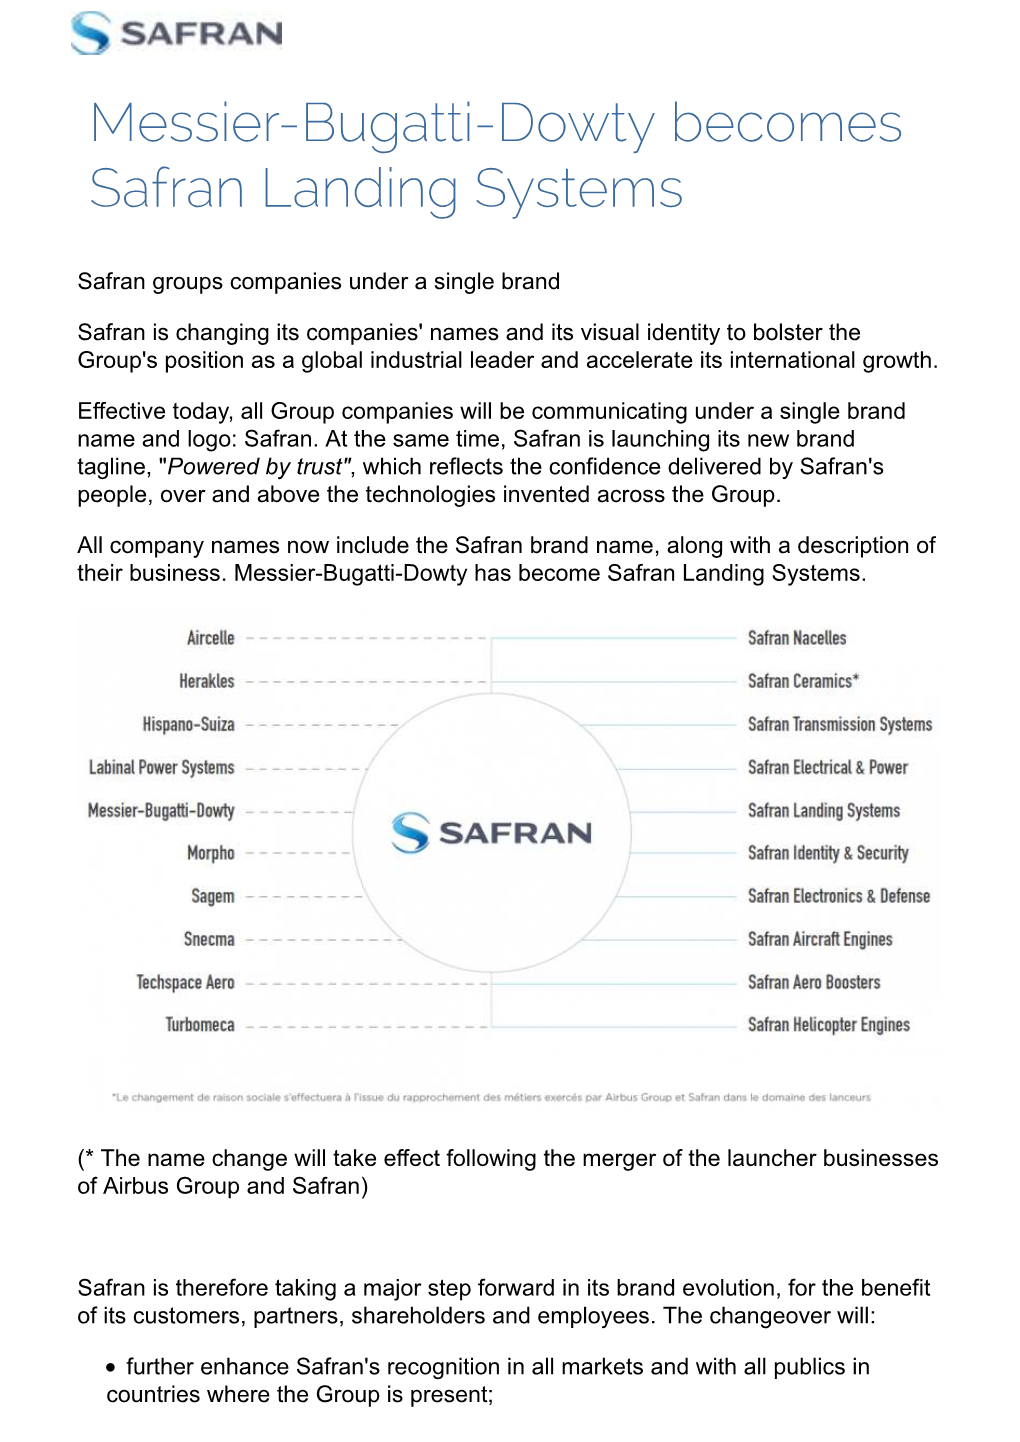 Messier-Bugatti-Dowty Becomes Safran Landing Systems